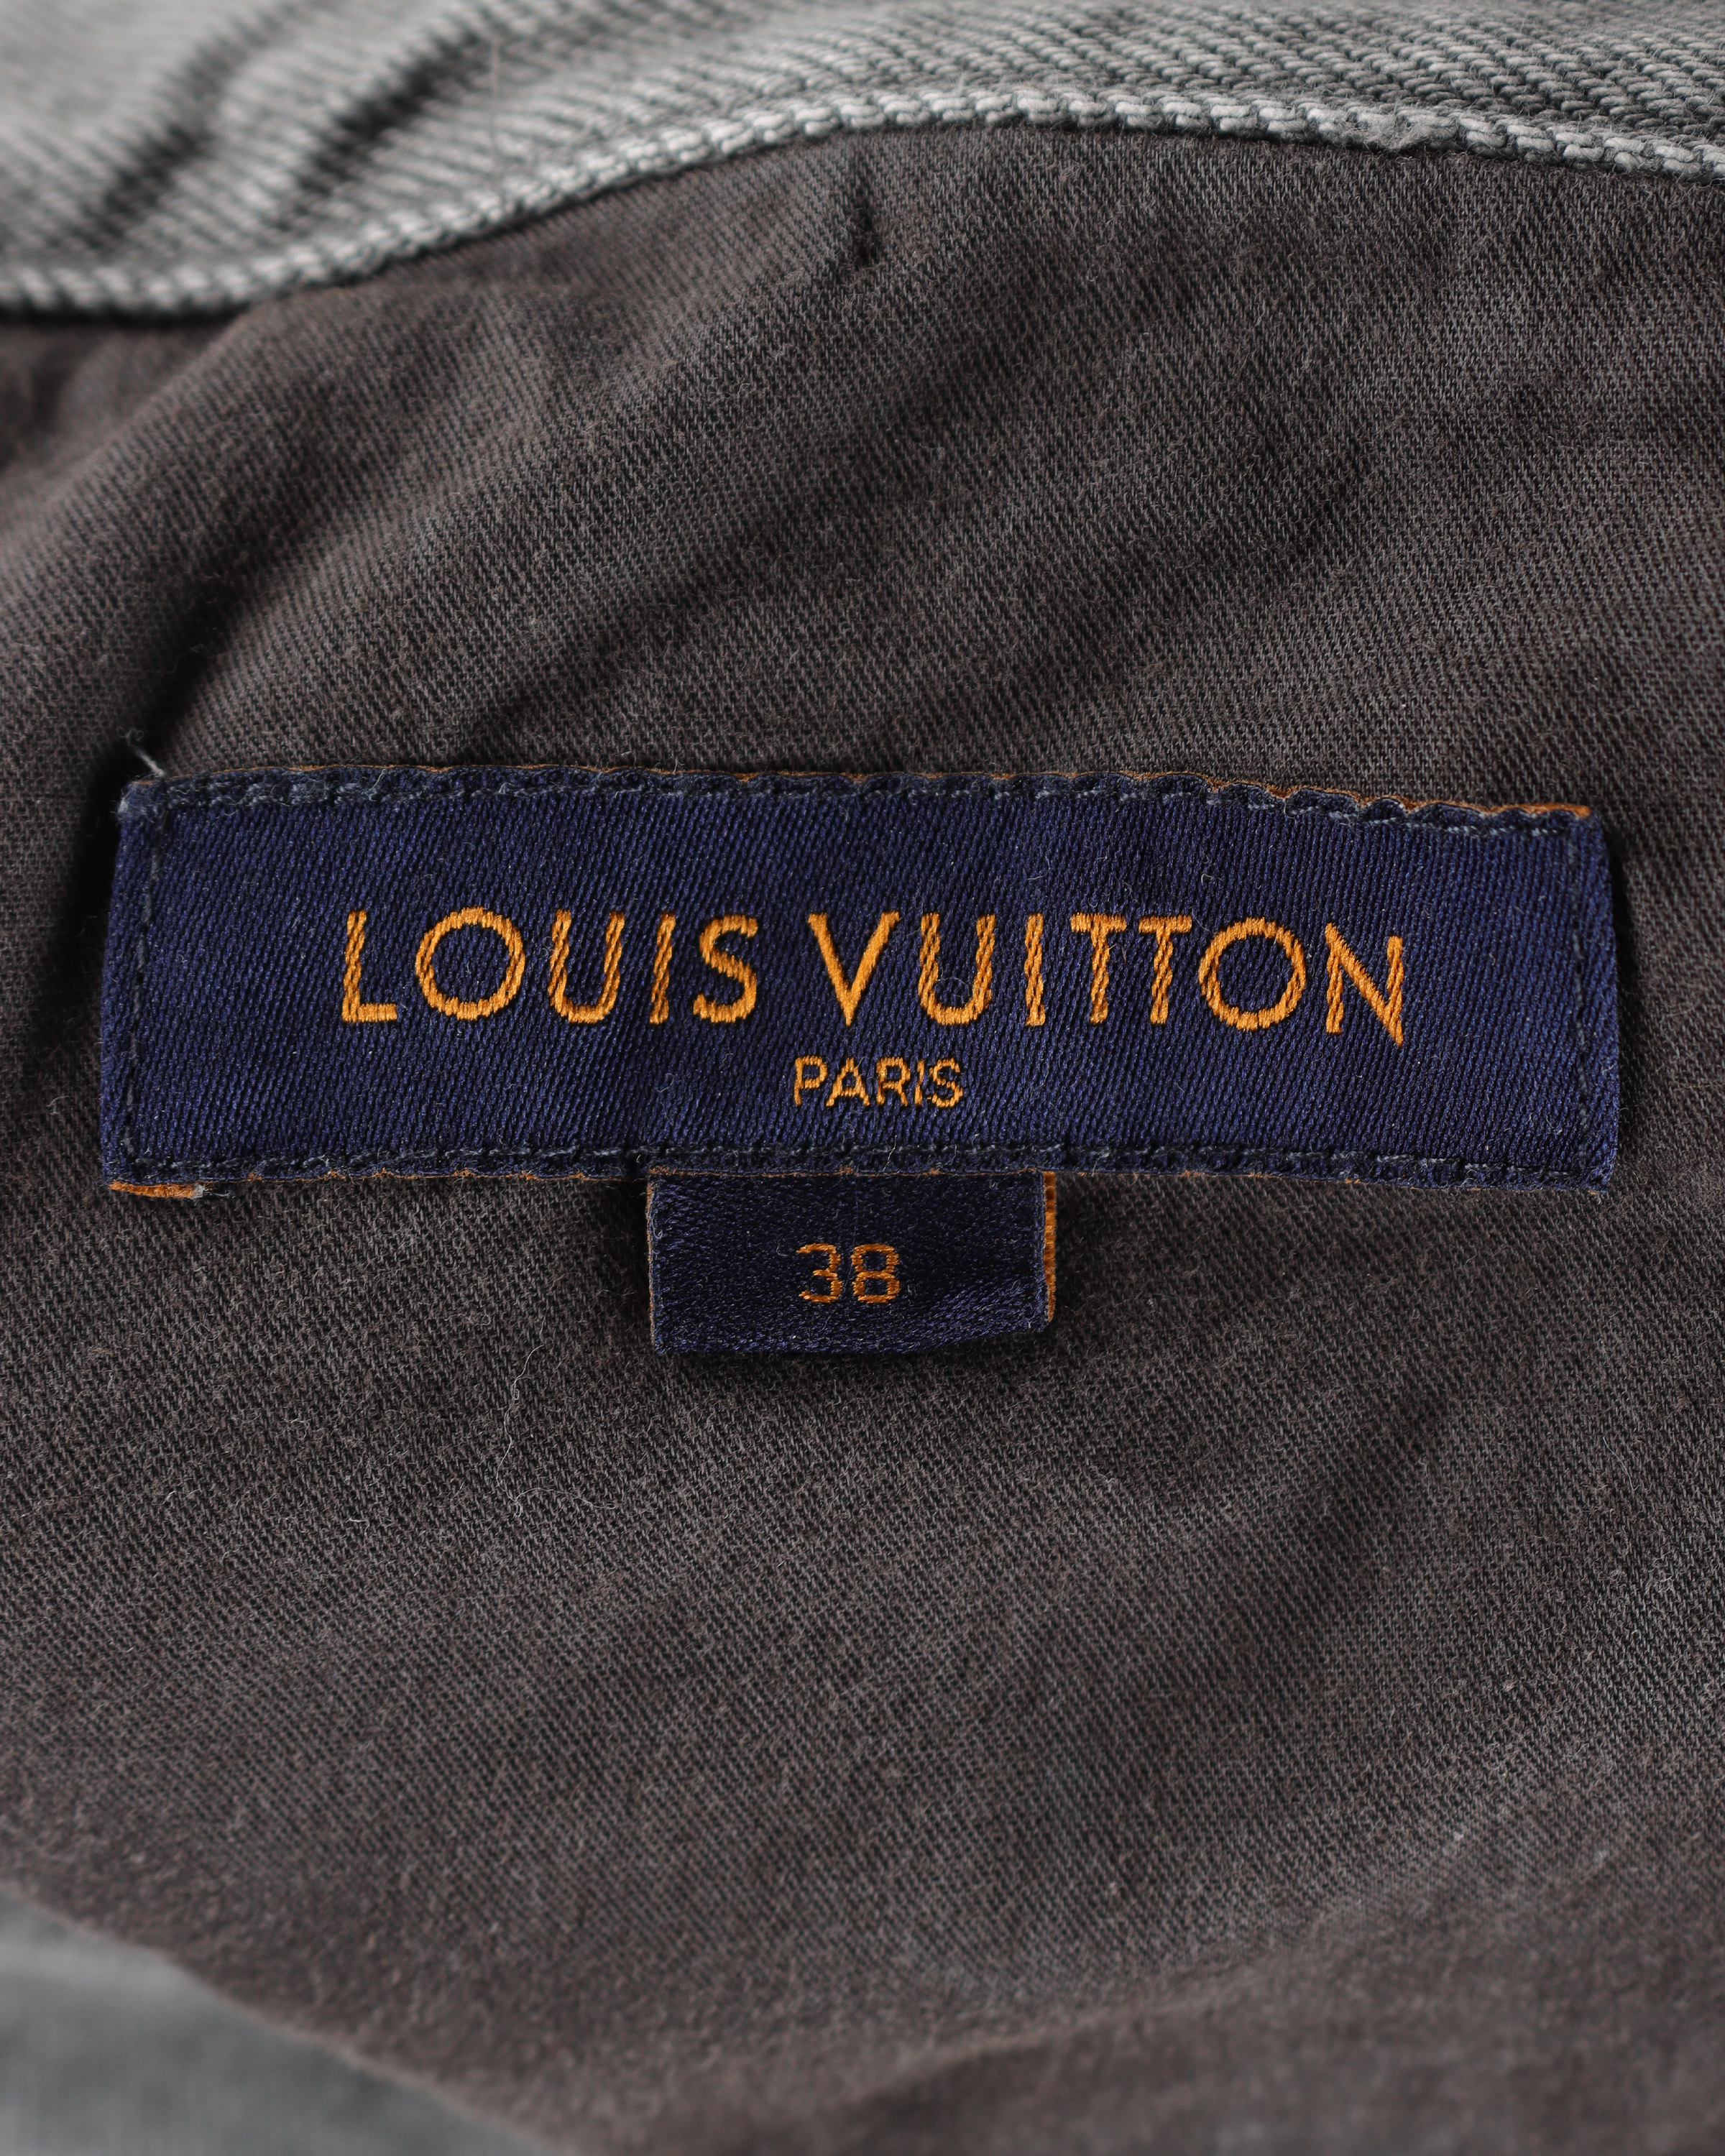 LOUIS VUITTON RELAXED CARGO PANTS in GRAY. SIZE LV M0 / USA 32. Style#  1AB5GT